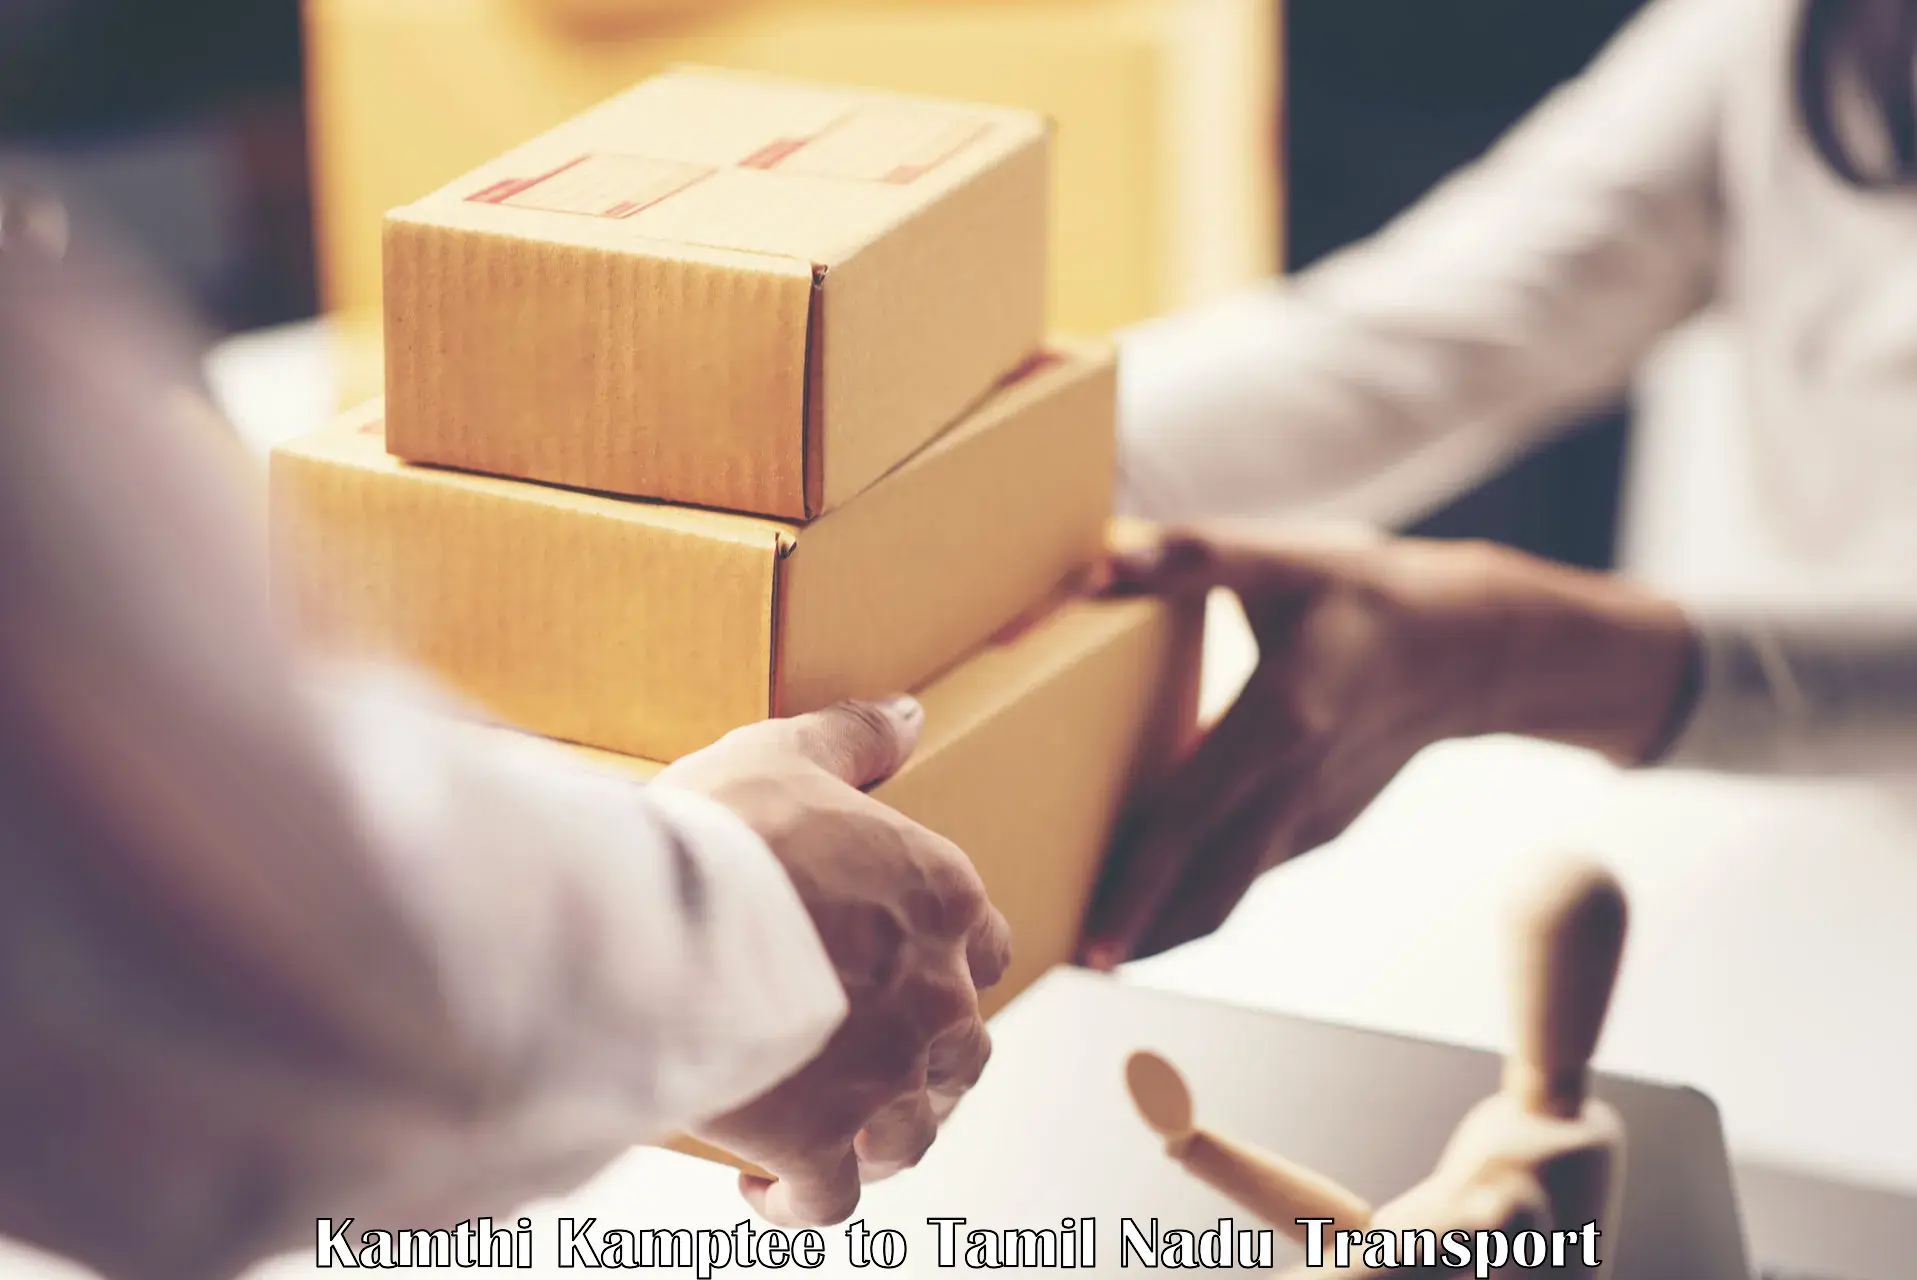 Shipping services Kamthi Kamptee to The Gandhigram Rural Institute